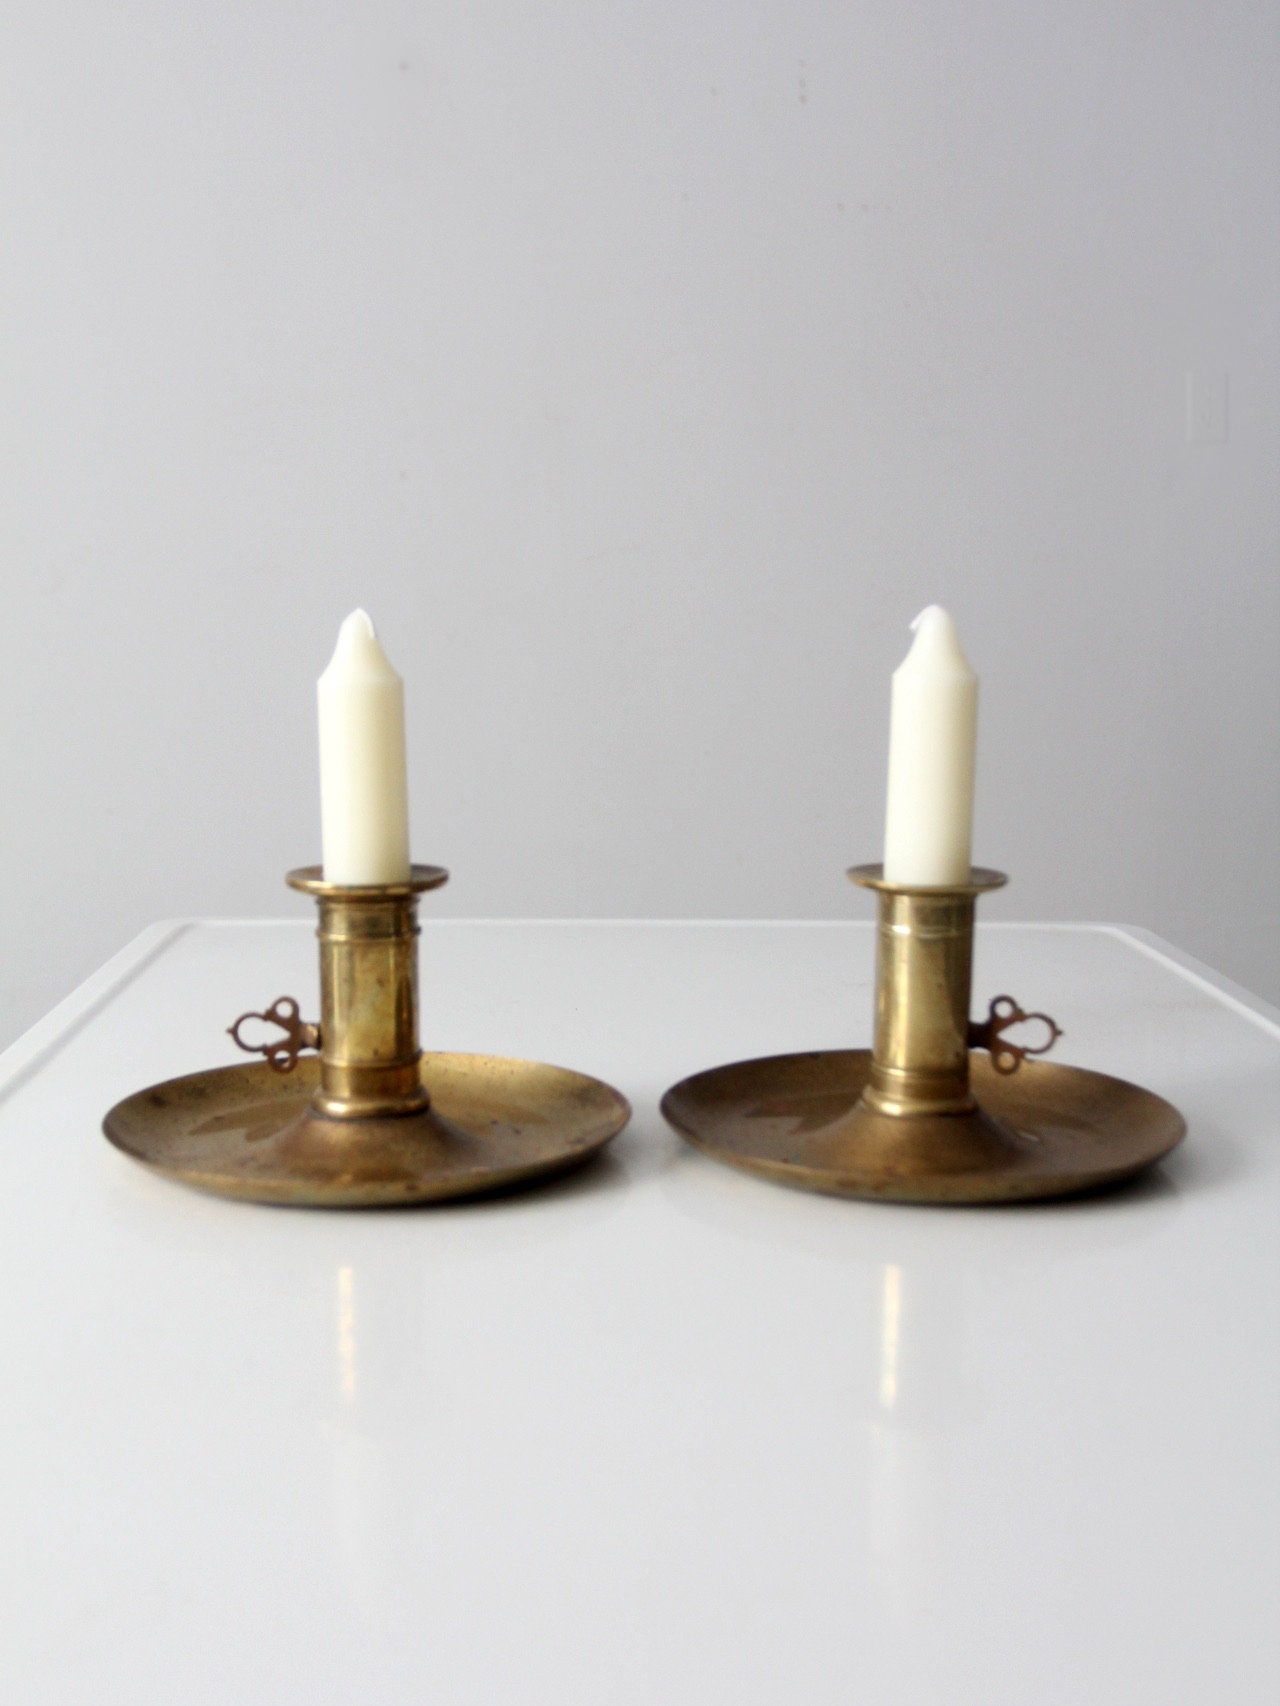 Antique Brass Push-up Candle Holders Pair -  Canada